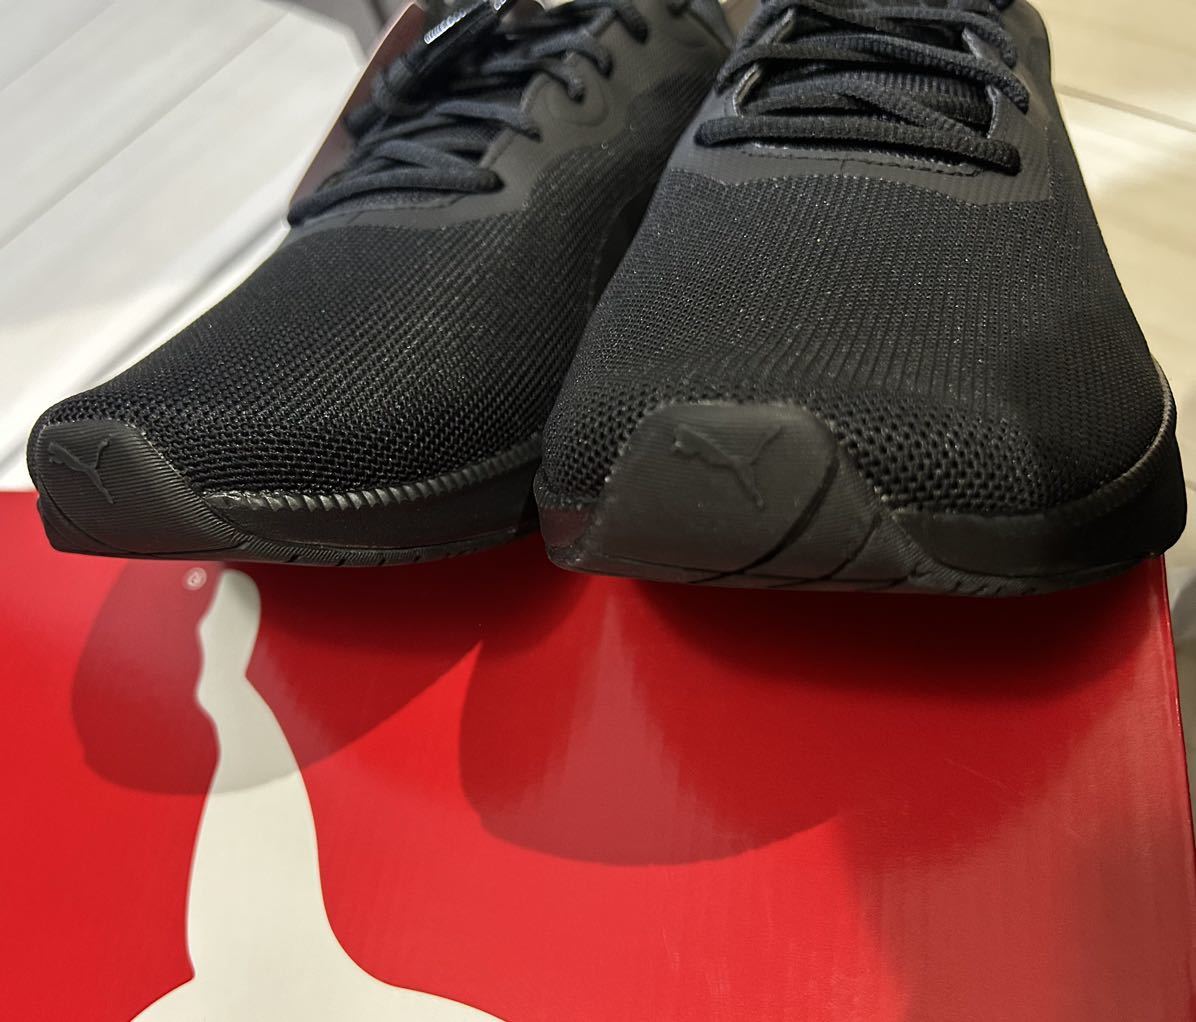  free shipping Puma sneakers indoor shoes also 30 centimeter 30cm new goods tag attaching large size all black simple Flyer Flex popular 